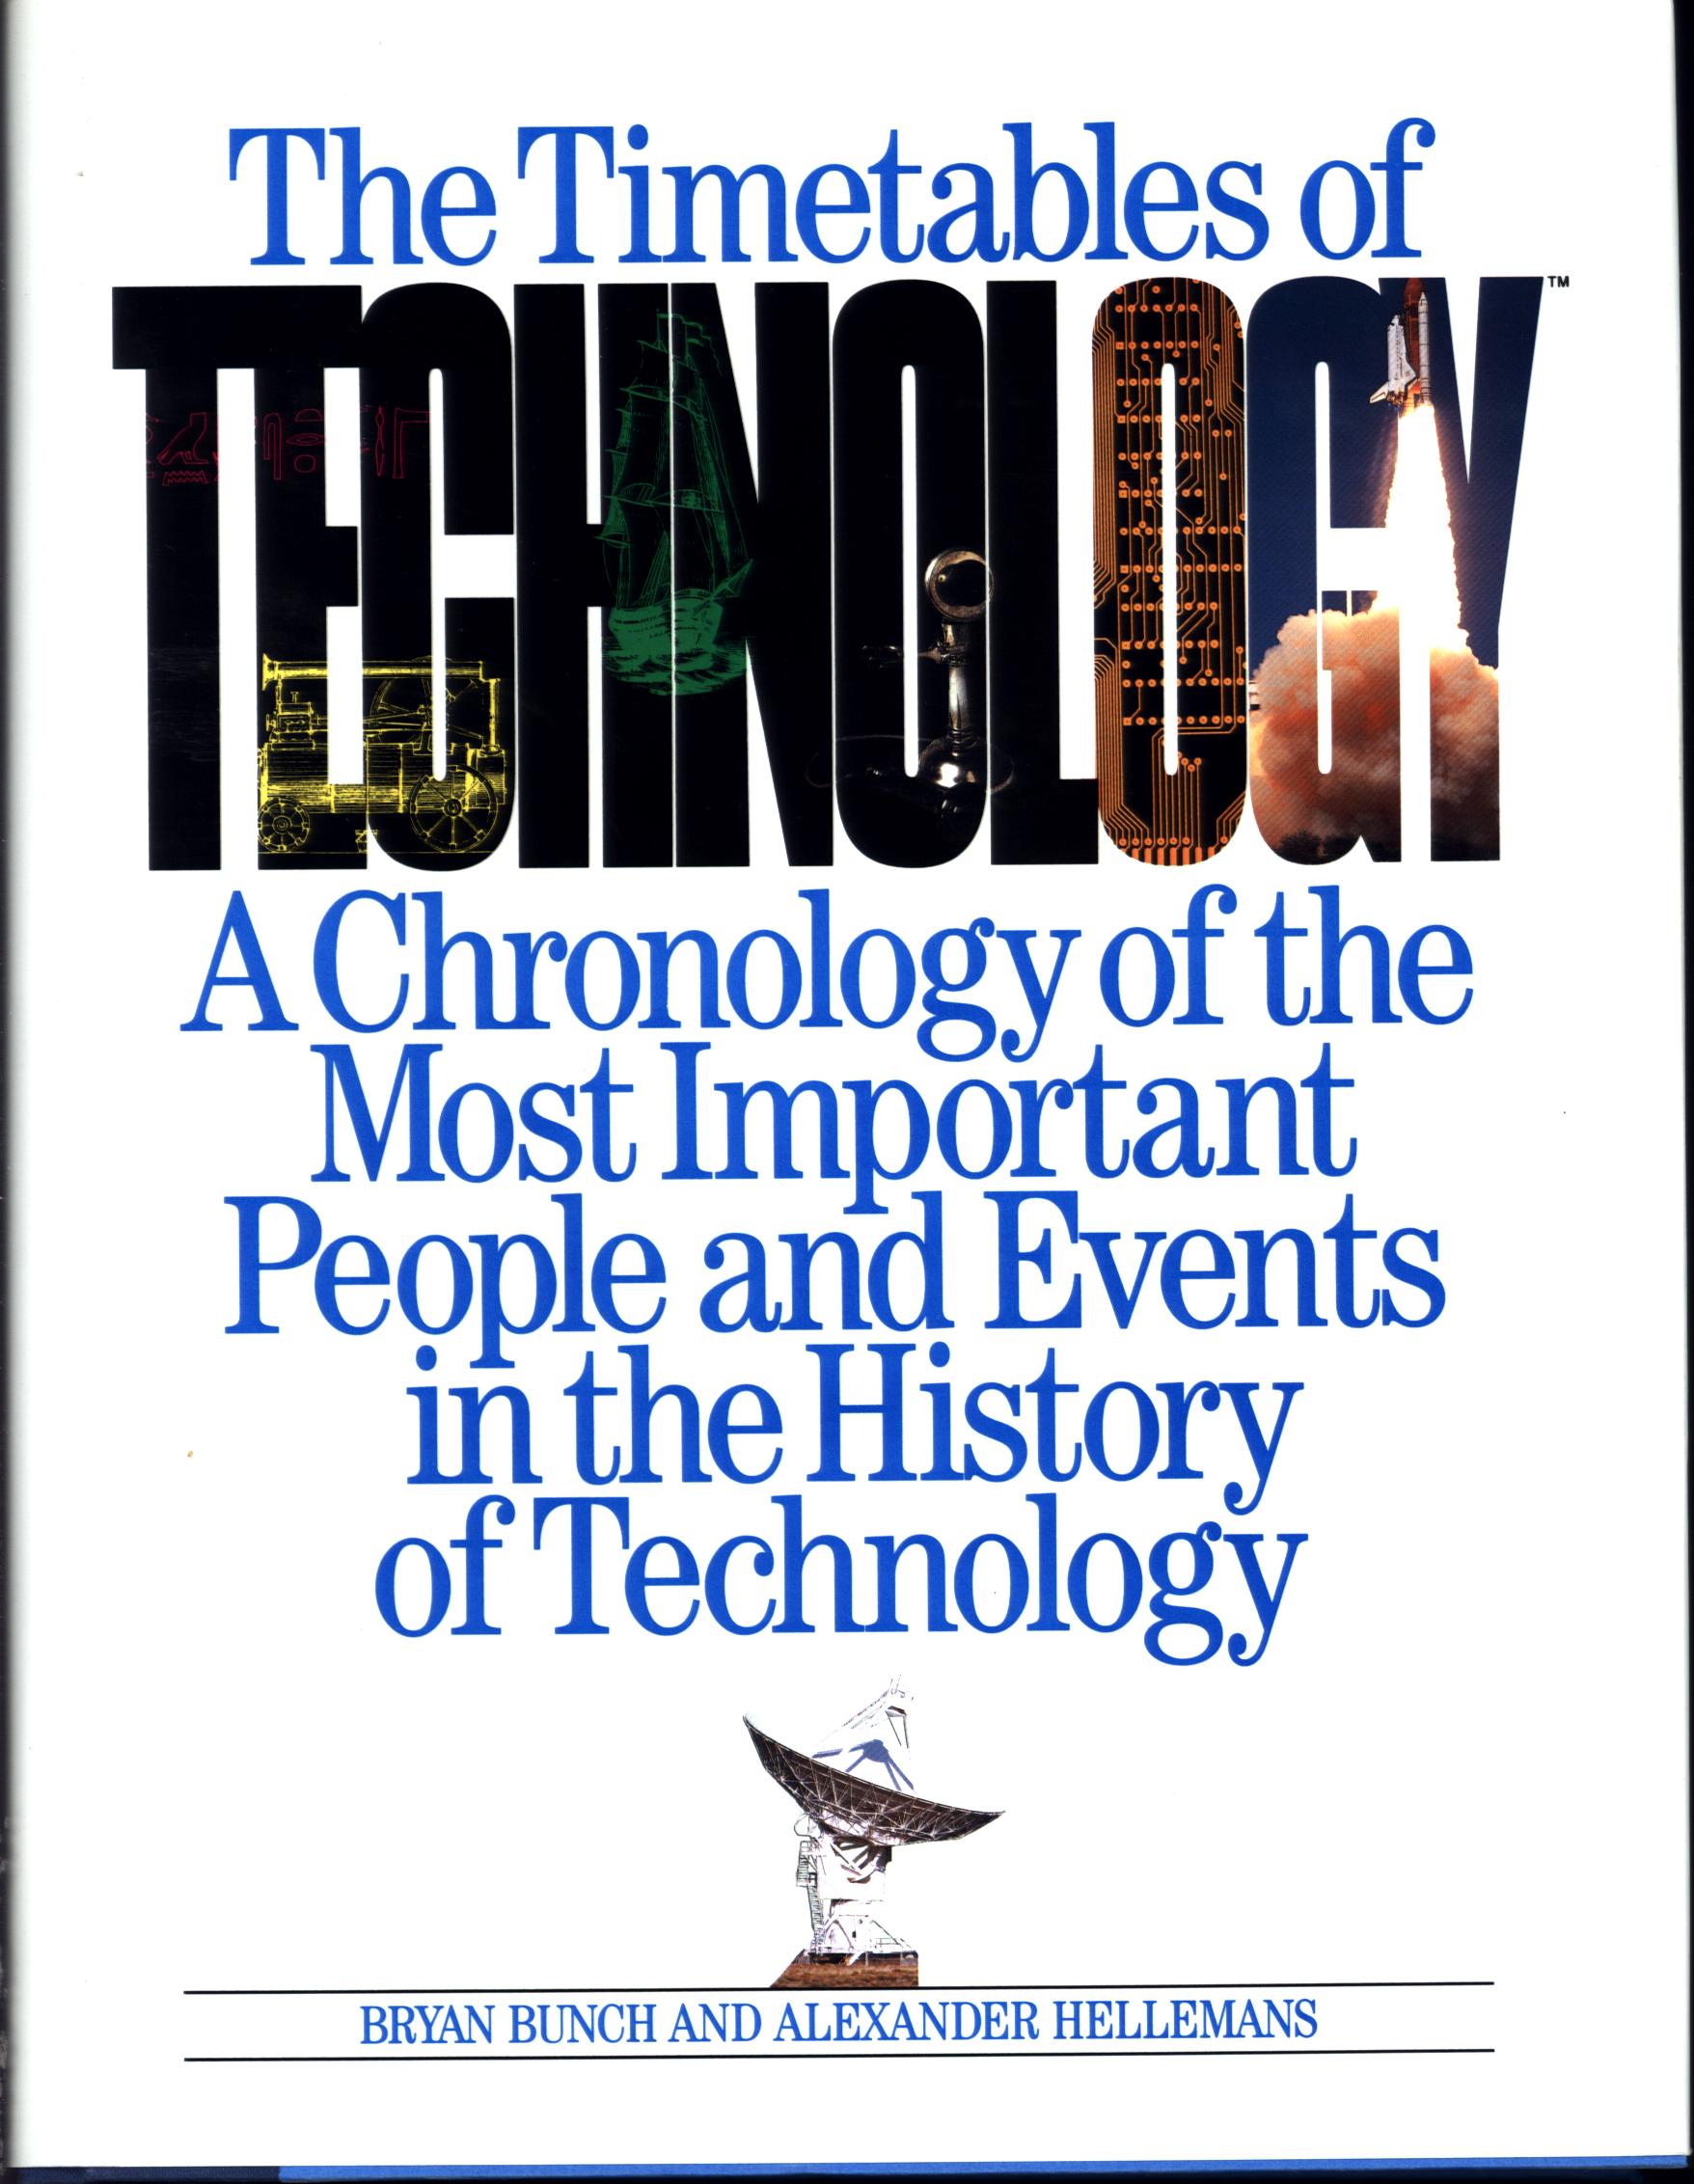 THE TIMETABLES OF TECHNOLOGY: a chronology of the most important people and events in the history of technology--cloth. 